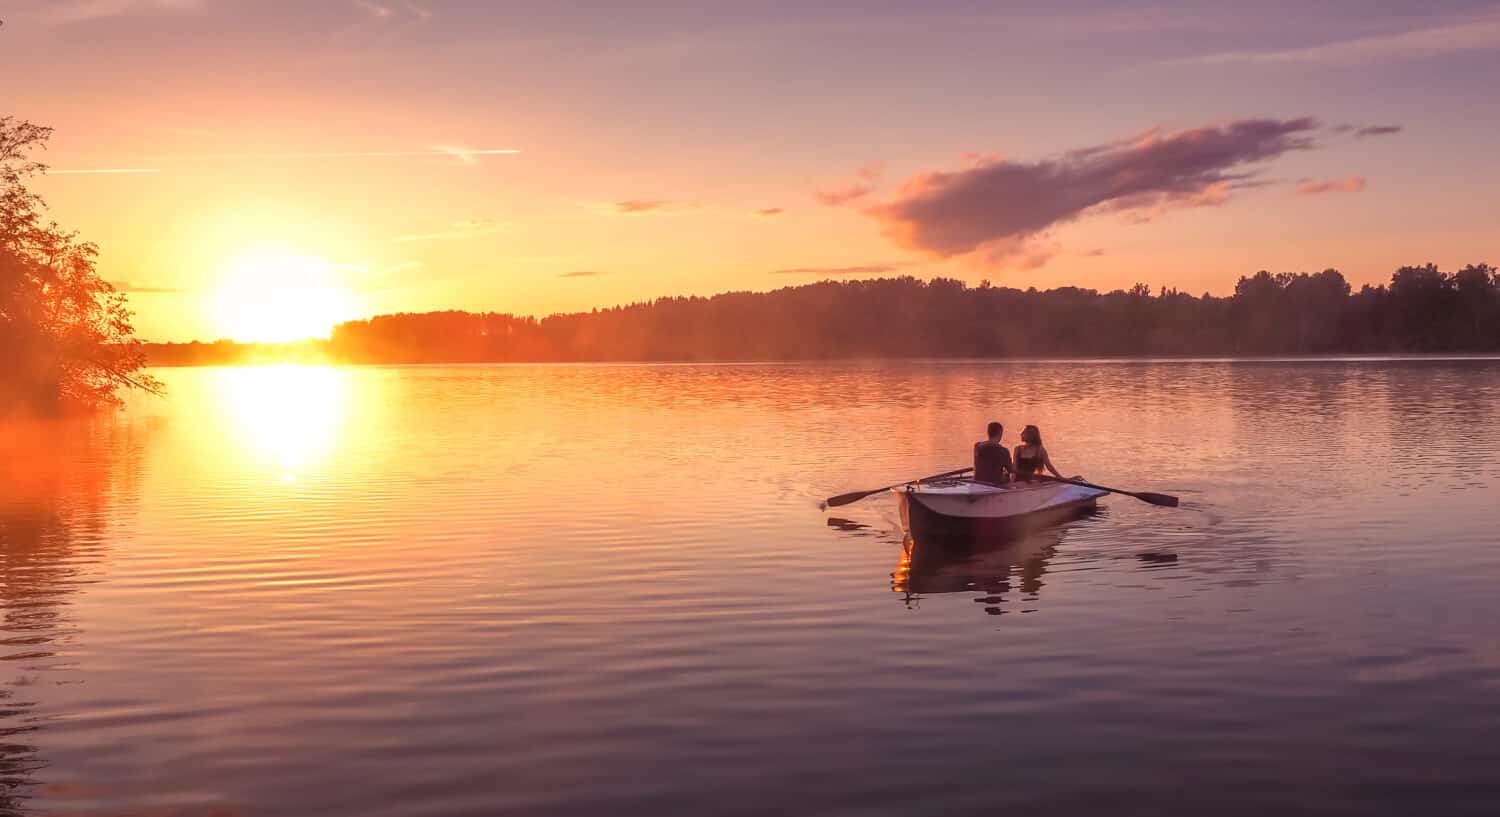 A beautiful golden sunset on the river. Lovers ride in a boat on a lake during a beautiful sunset. Happy couple woman and man together relaxing on the water. The beautiful nature around. 